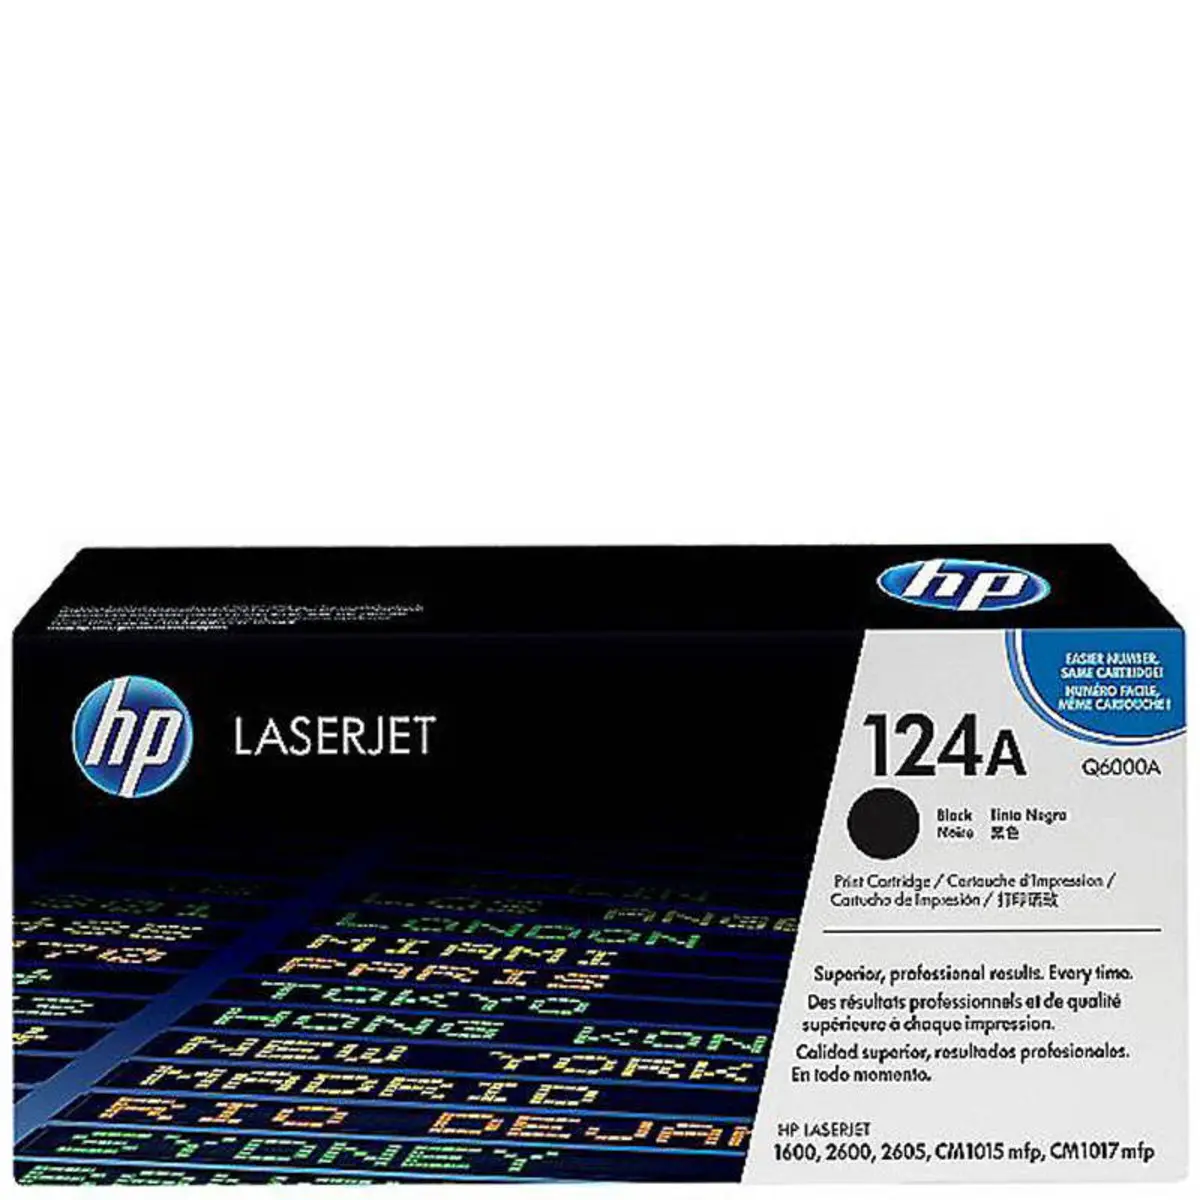 hewlett packard 124a black - What toner is compatible with HP 124A